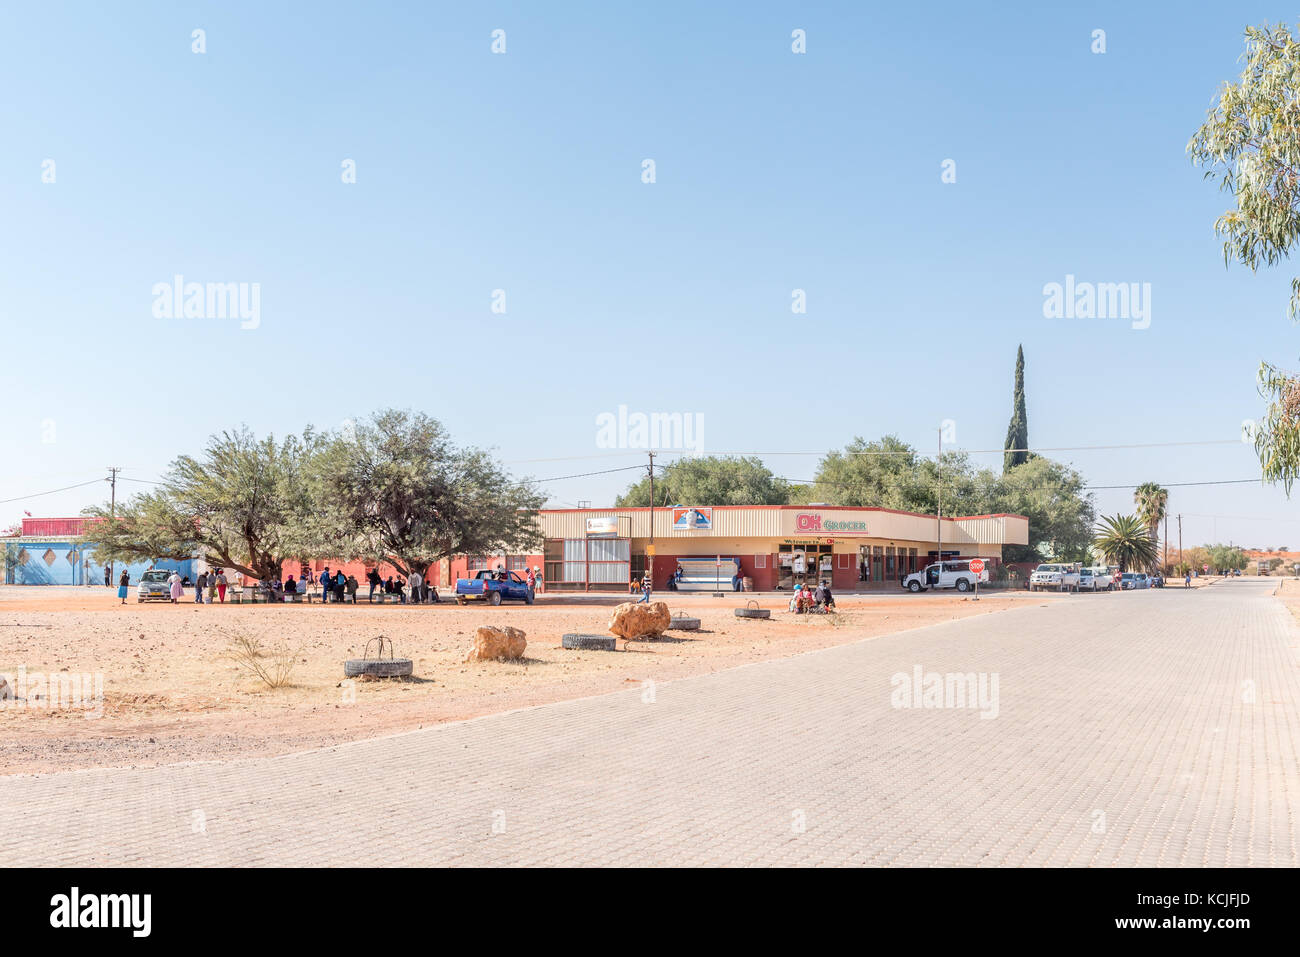 GOCHAS, NAMIBIA - JULY 5, 2017: A street scene with a supermarket, vehicles and people in Gochas in the Hardap Region in Namibia Stock Photo